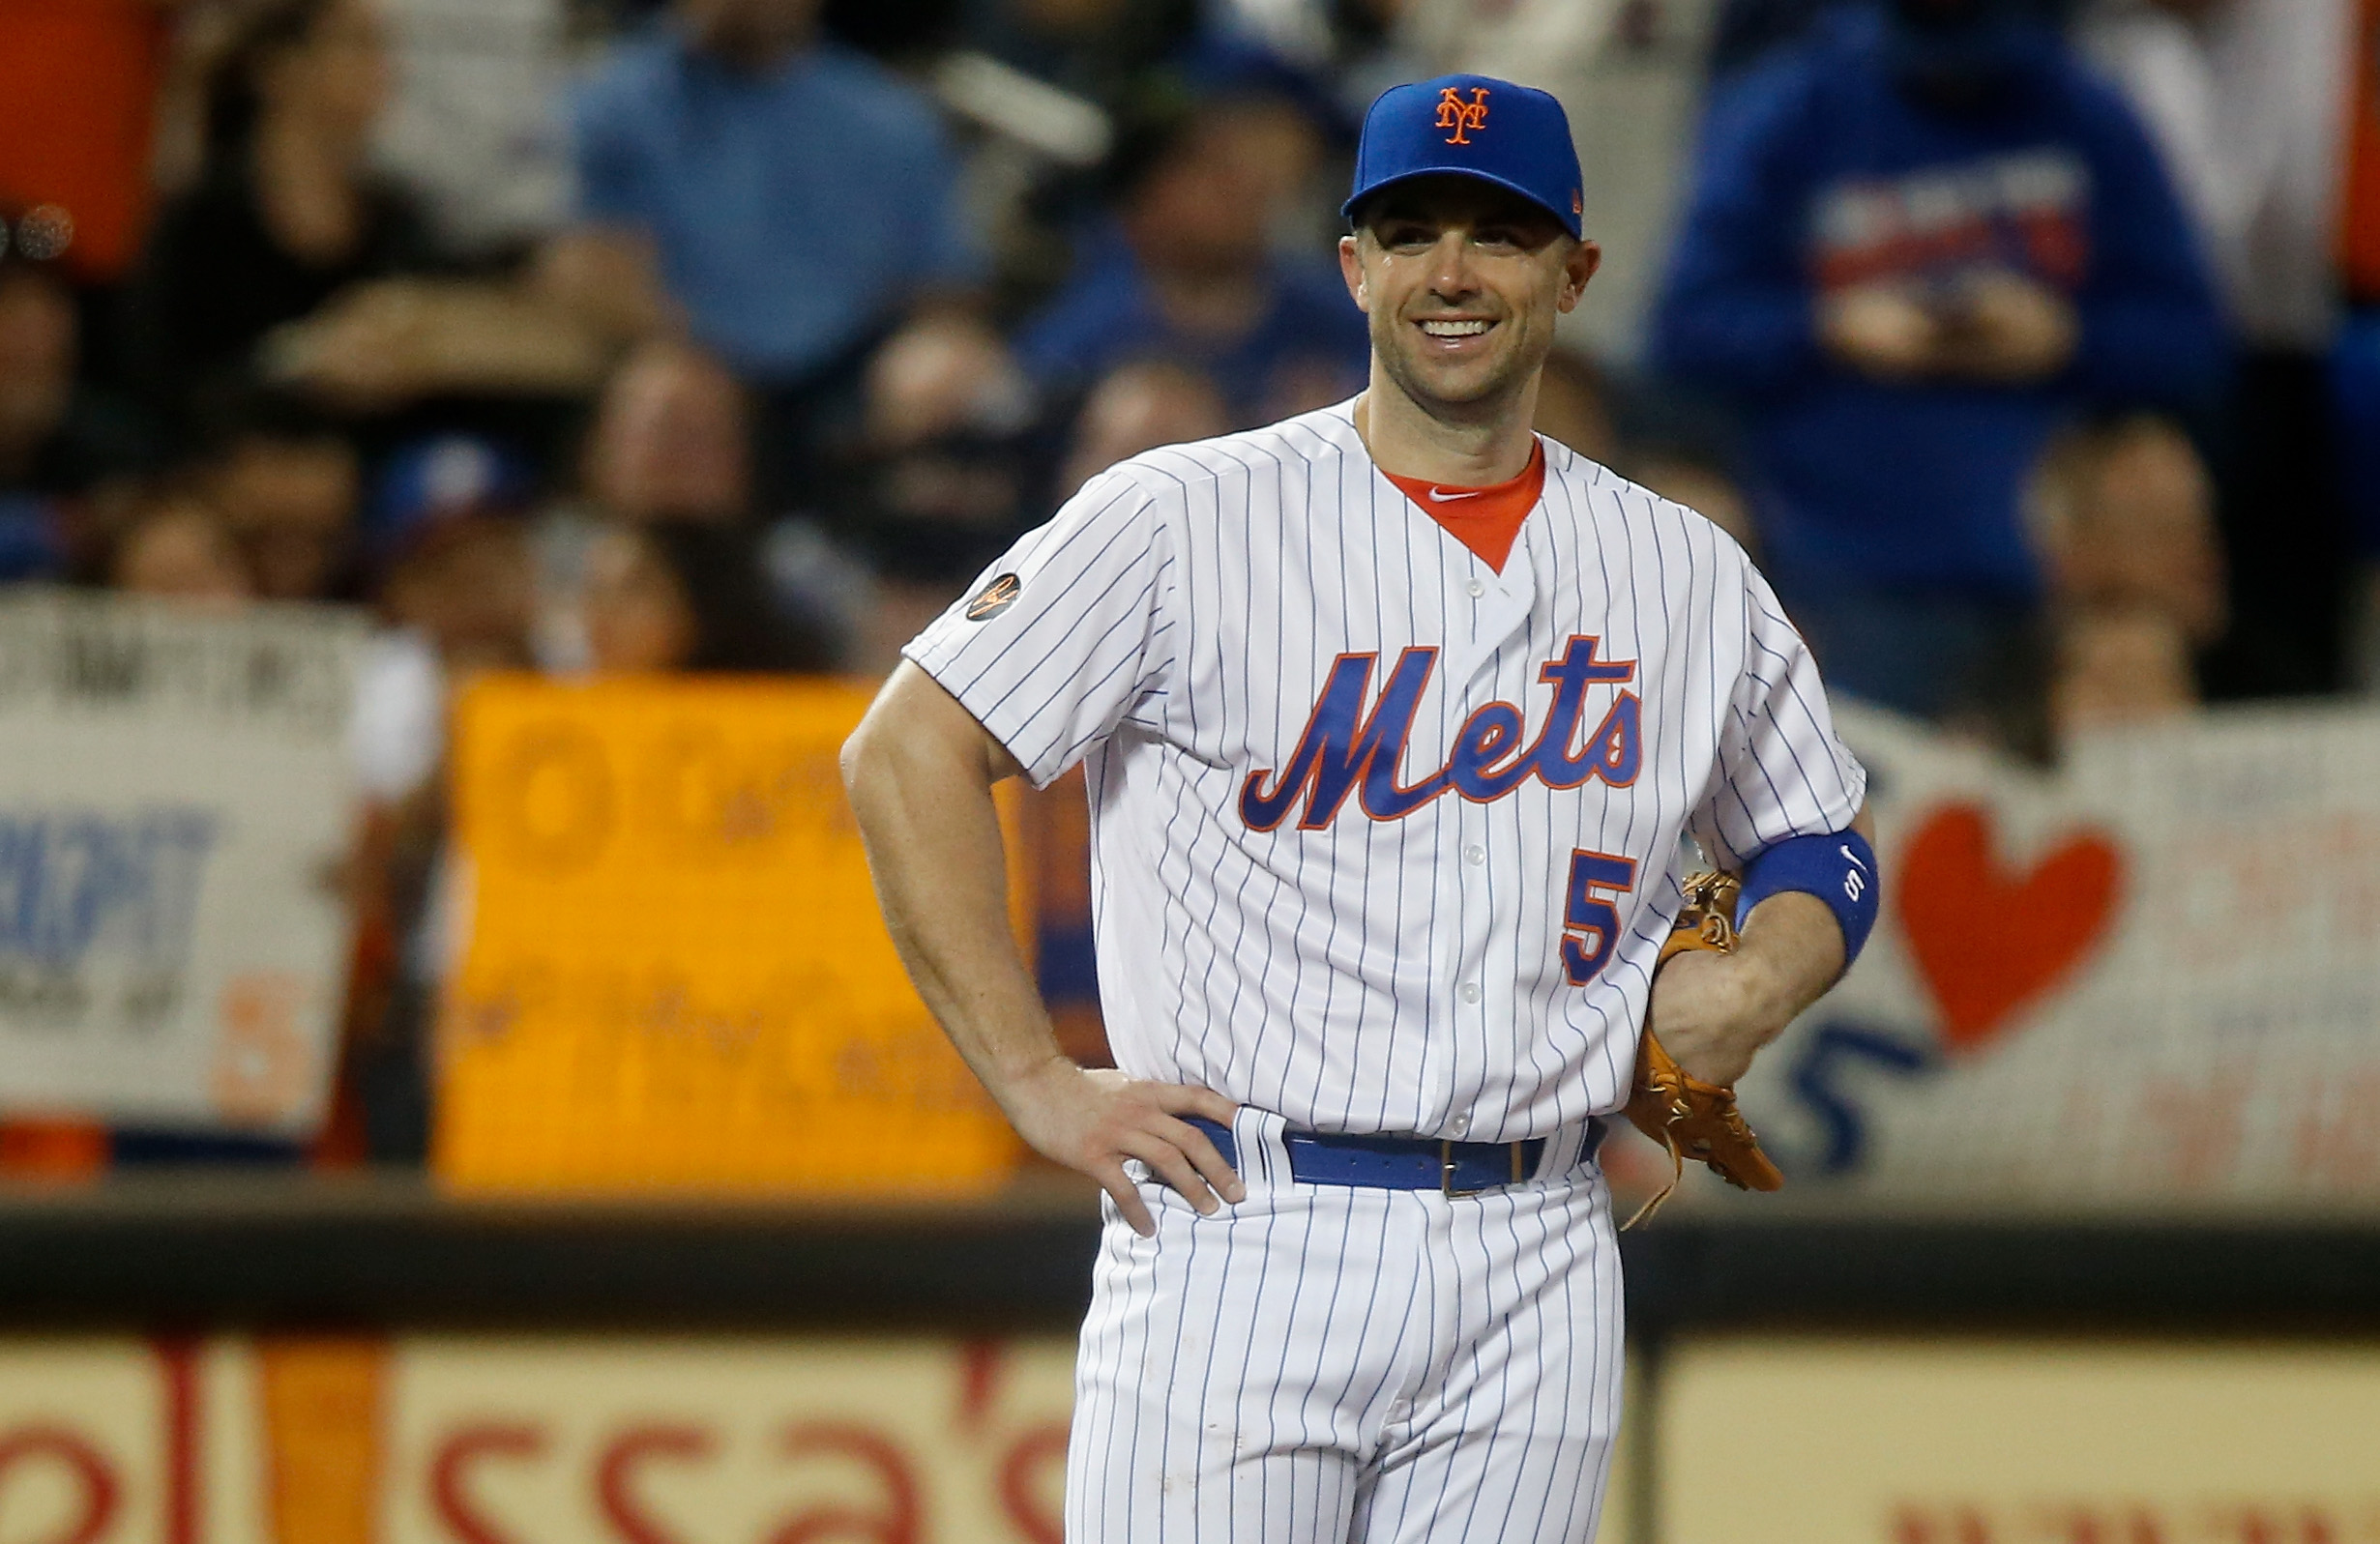 Years Later, Mets Still Searching for David Wright's Replacement